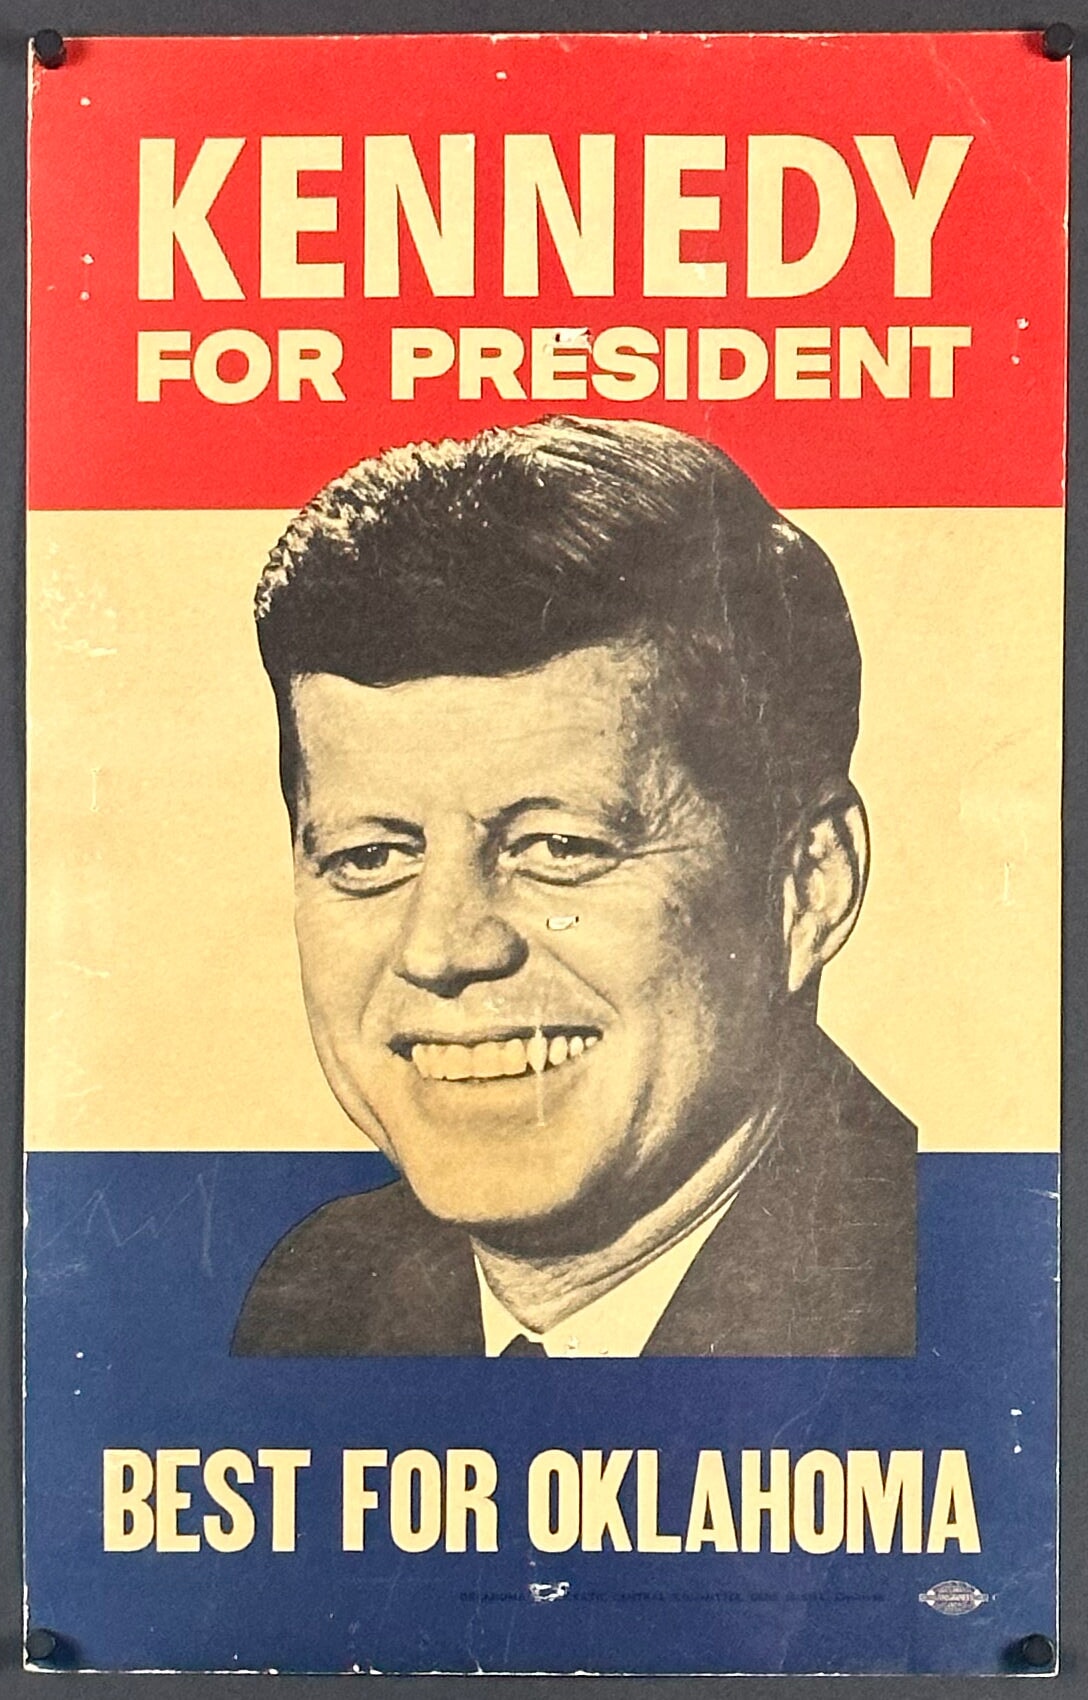 "Kennedy For President" JFK Campaign Poster (1960) - posterpalace.com